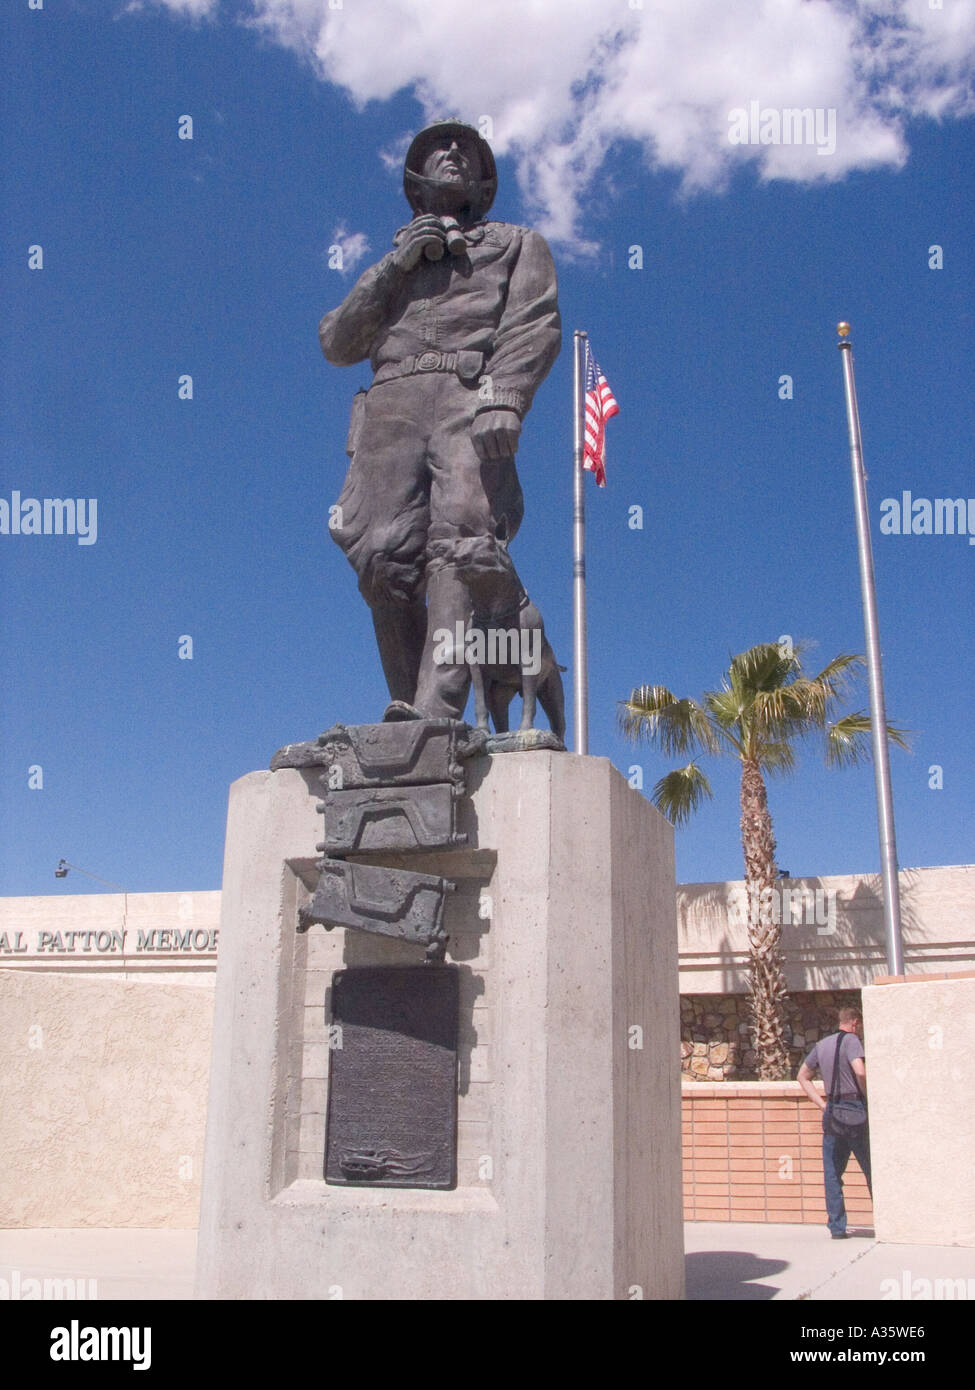 General George Patton World War 2 WWII memorial and museum in Mojave California desert Stock Photo